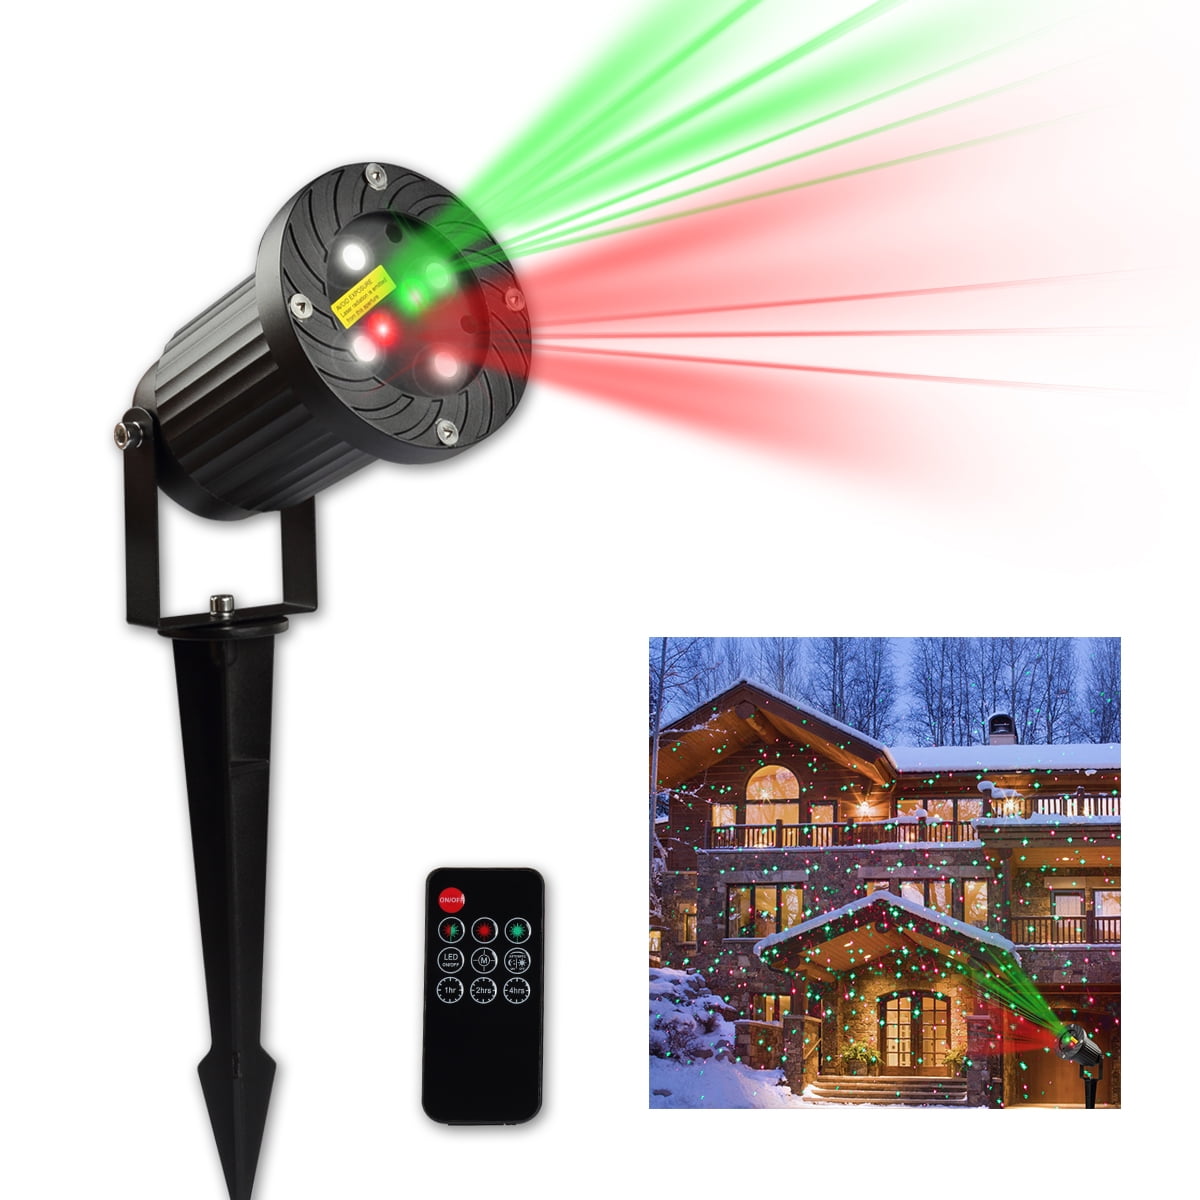 Remote Controlled Outdoor Waterproof Laser Lawn Projector Spotlight Christmas  Lights Red+Green Multi Pattern Stage Light IP44 Rated 100 240V From  Cxwonled, $29.3